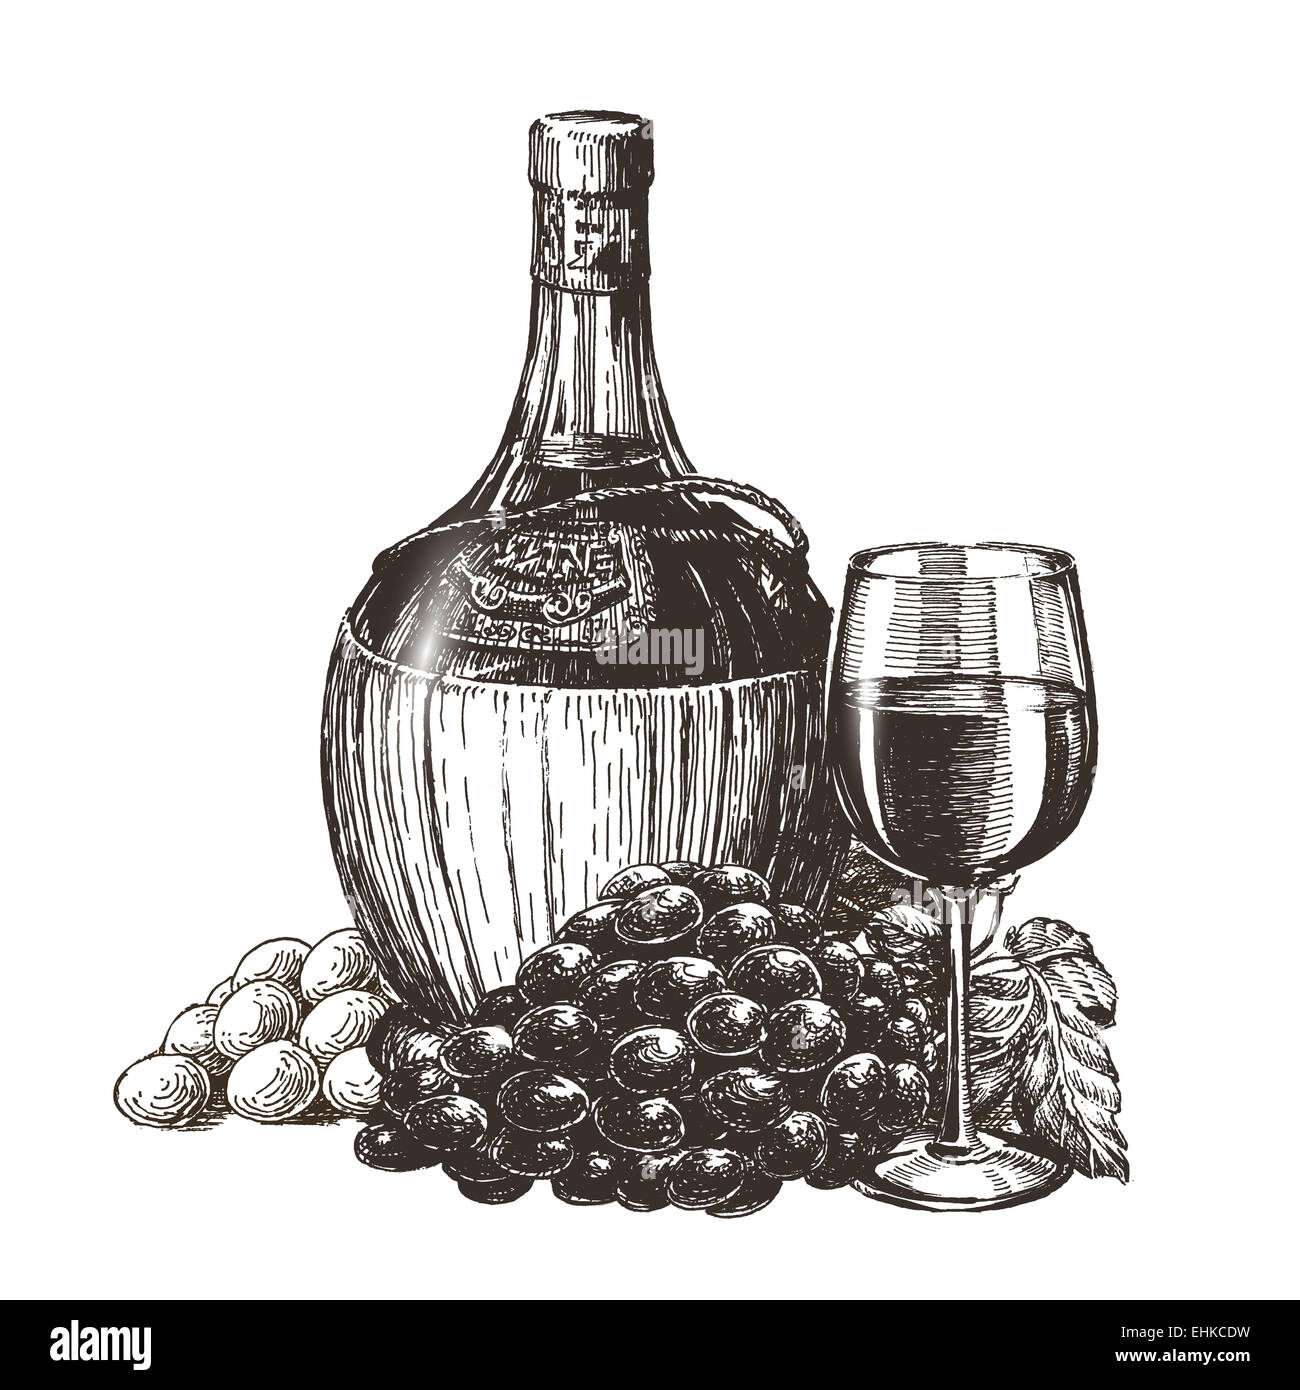 winemaking, wine on a white background. sketch Stock Photo